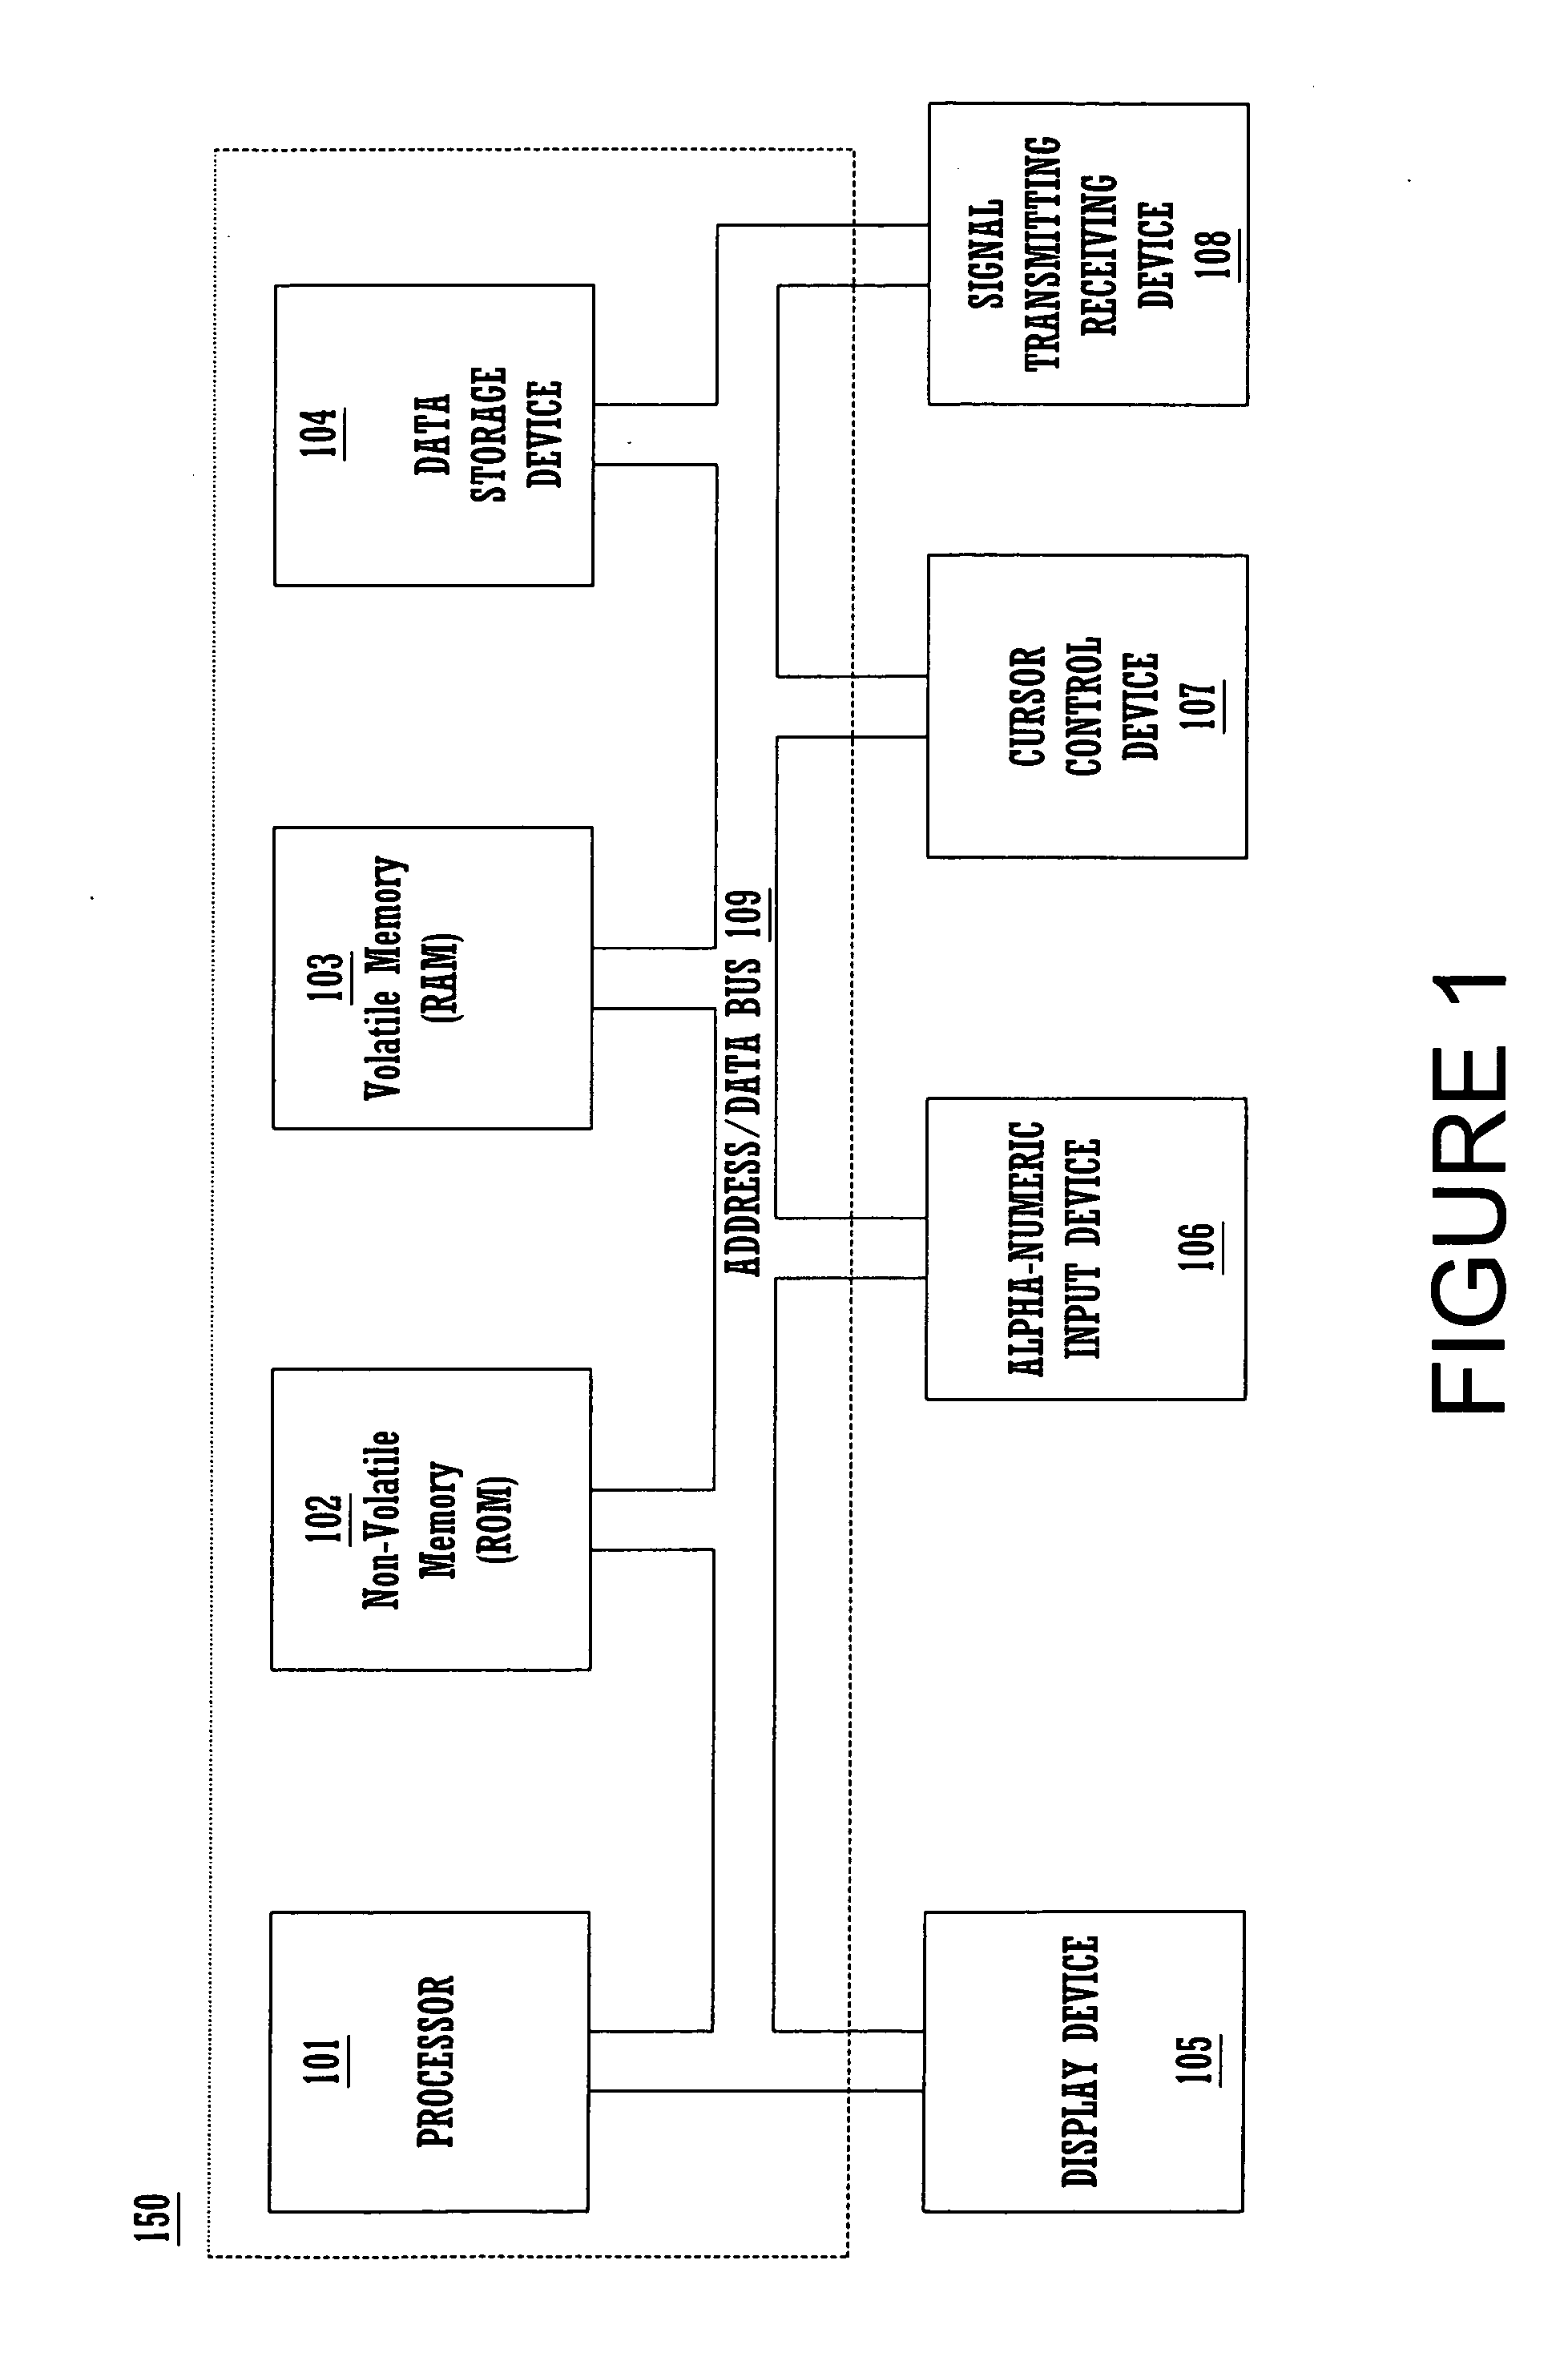 Automatic application programming interface (API) generation for functional blocks